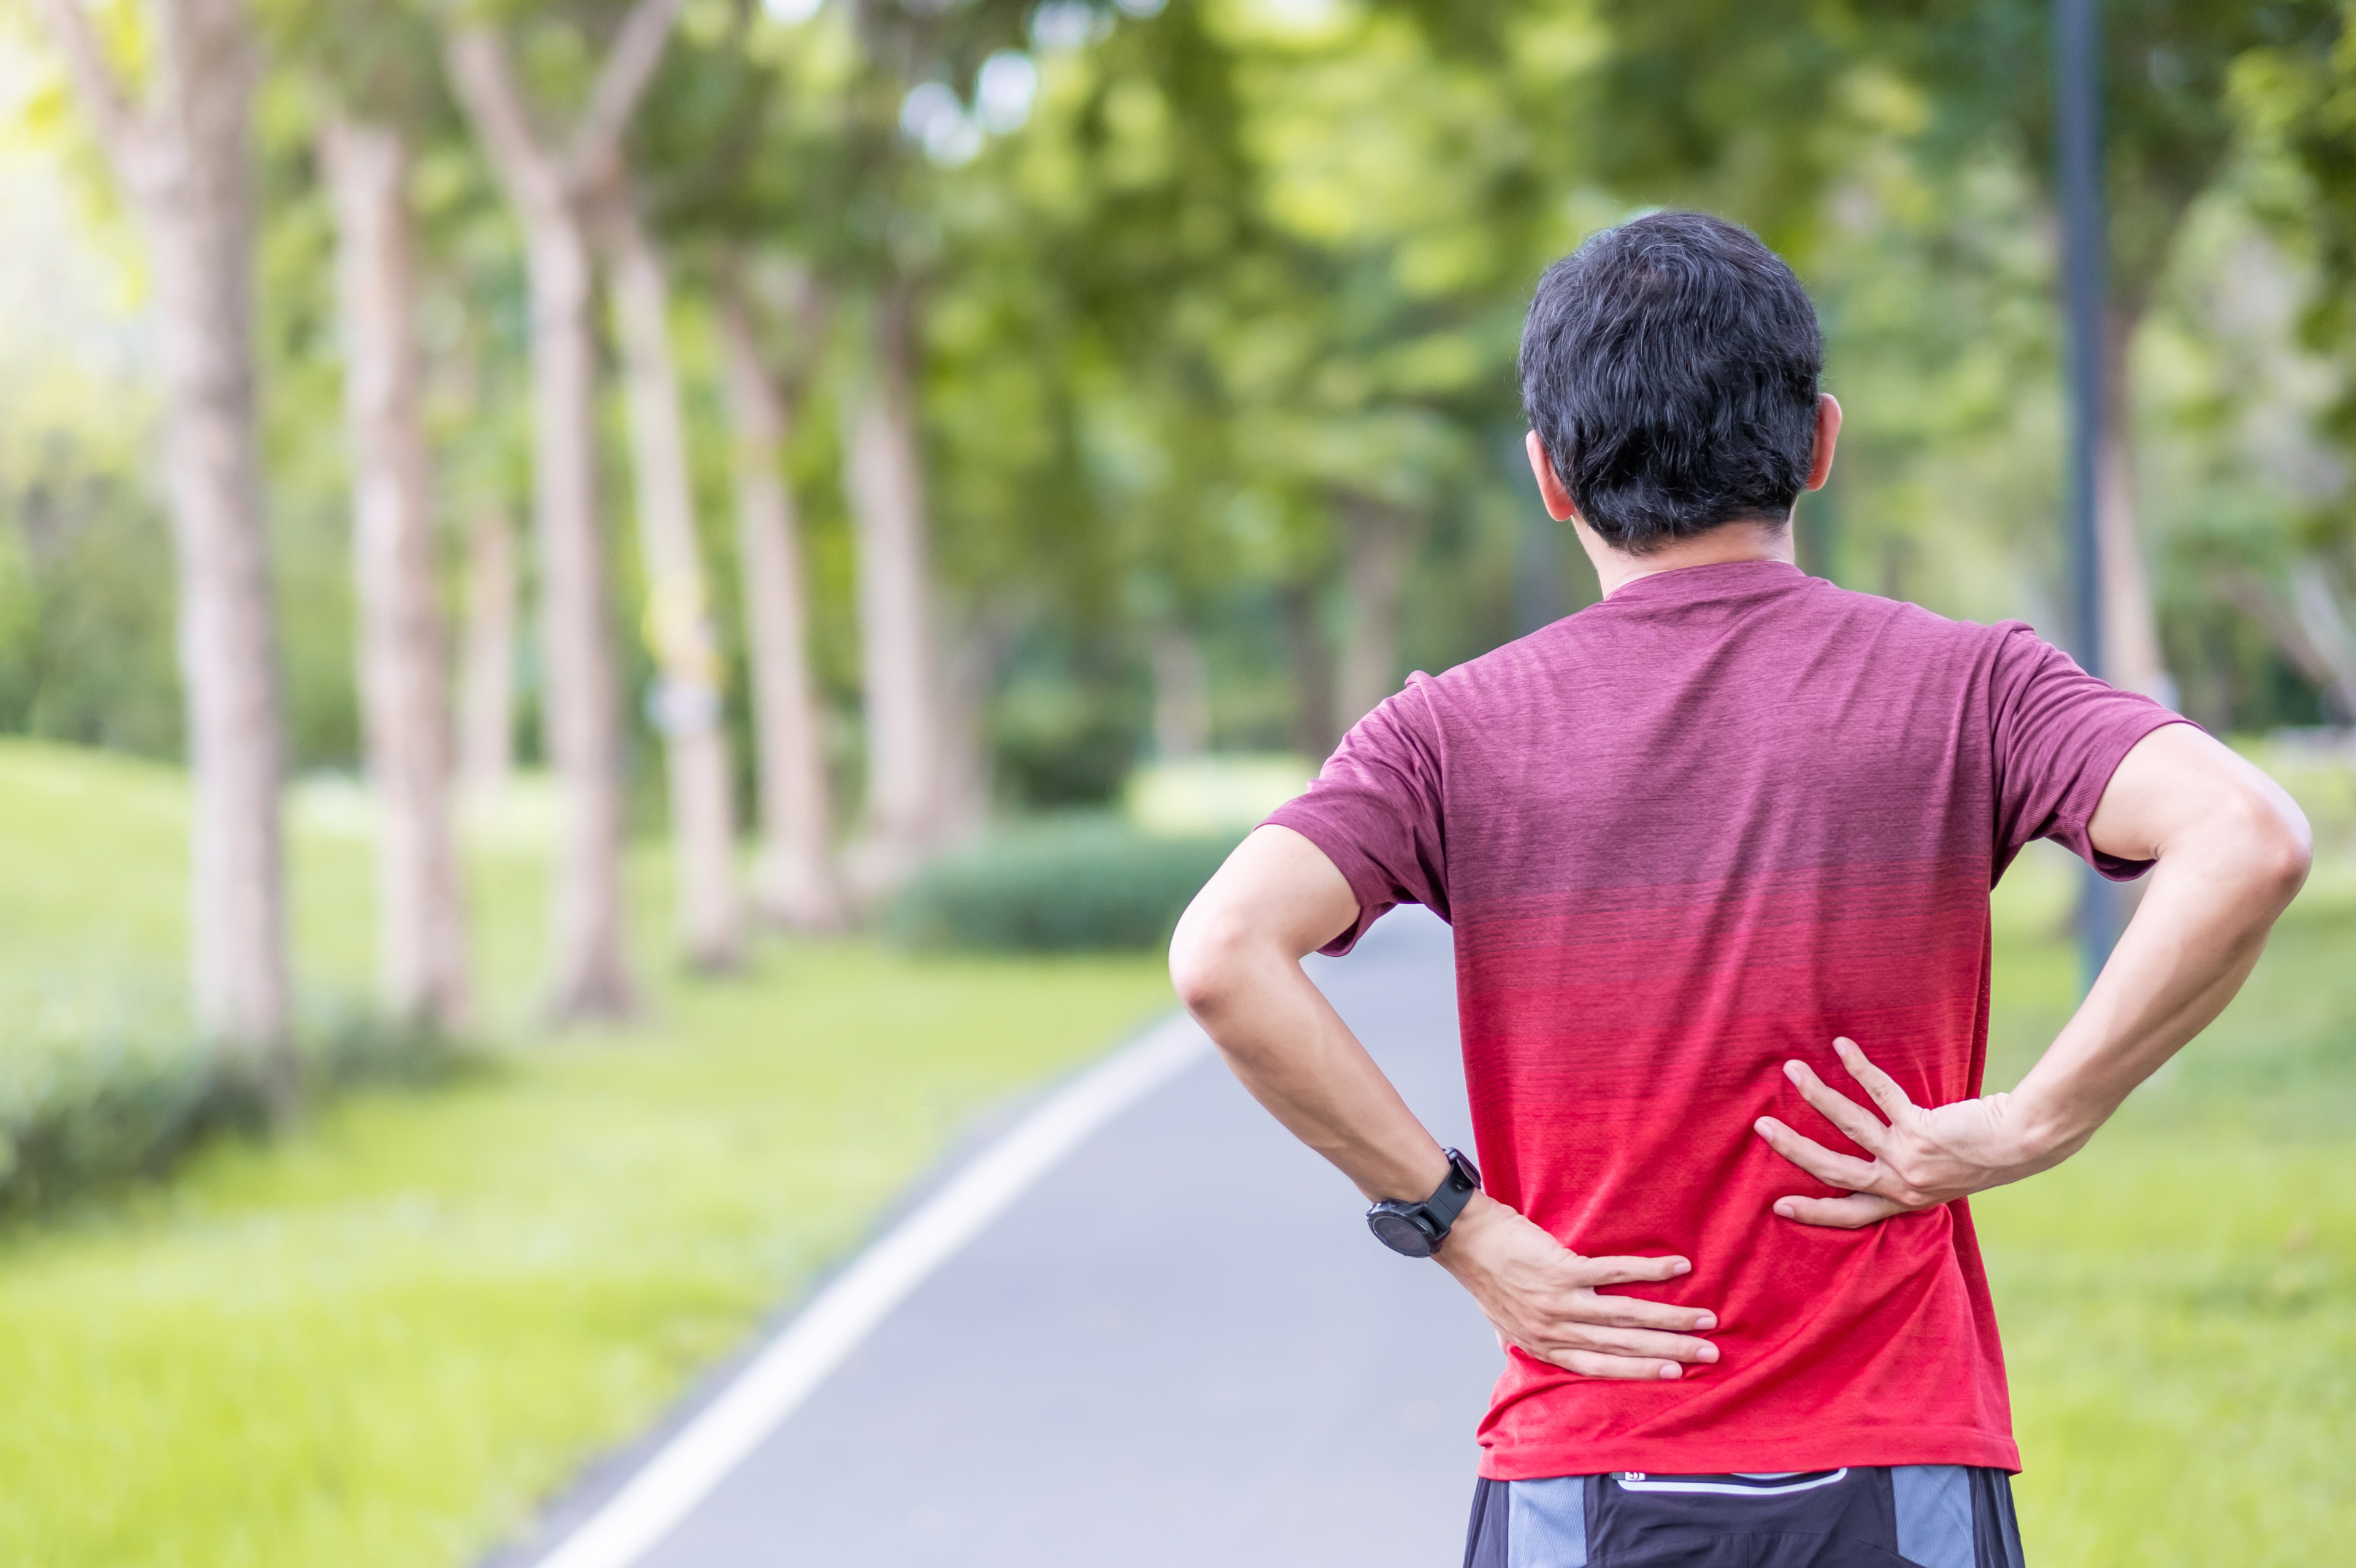 You can often continue running while recovering from back pain by adjusting your training plan or technique.